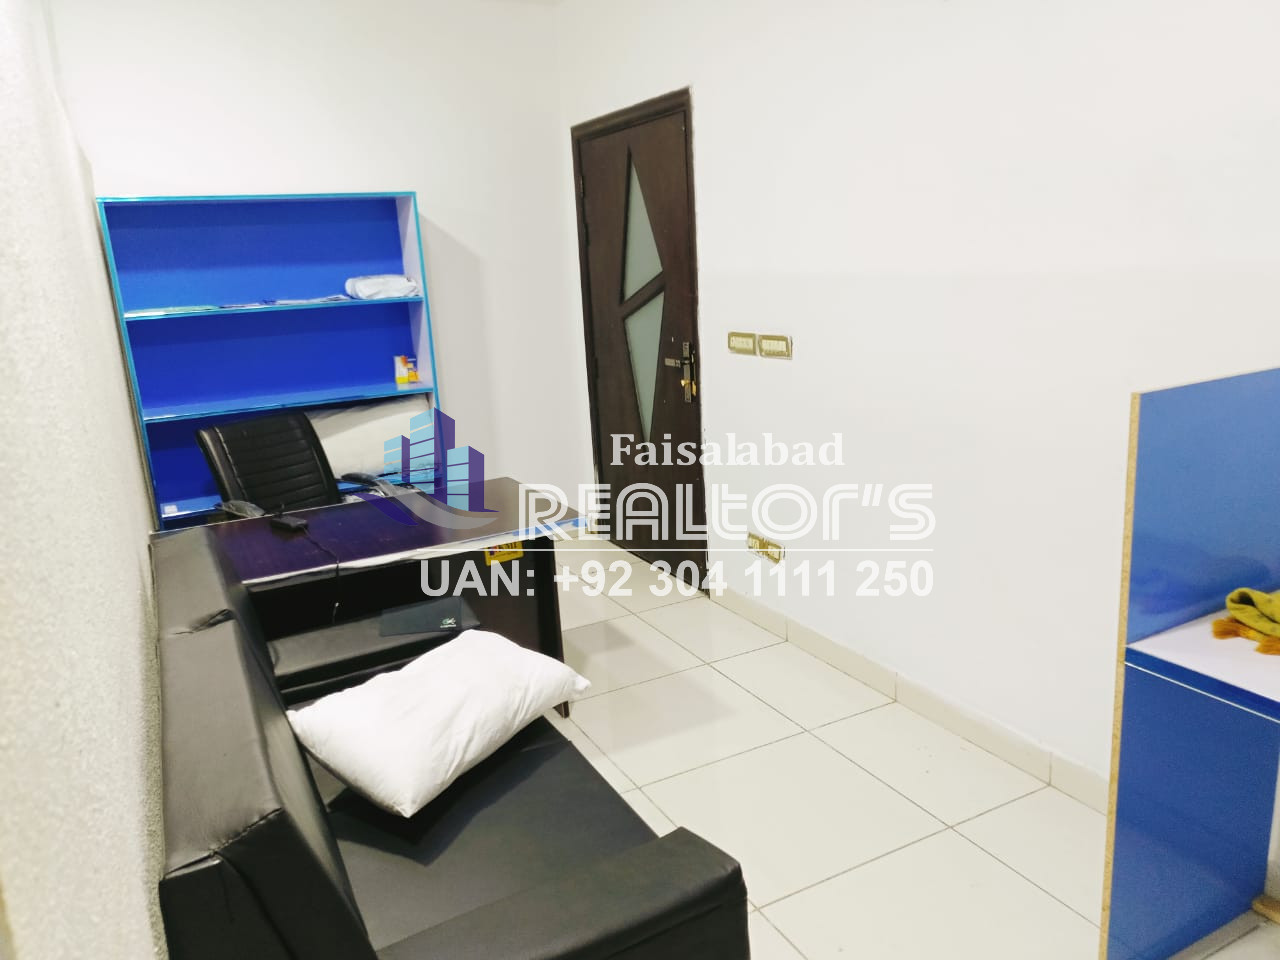 3000 sq ft office for rent in Faisalabad - Commercial Office